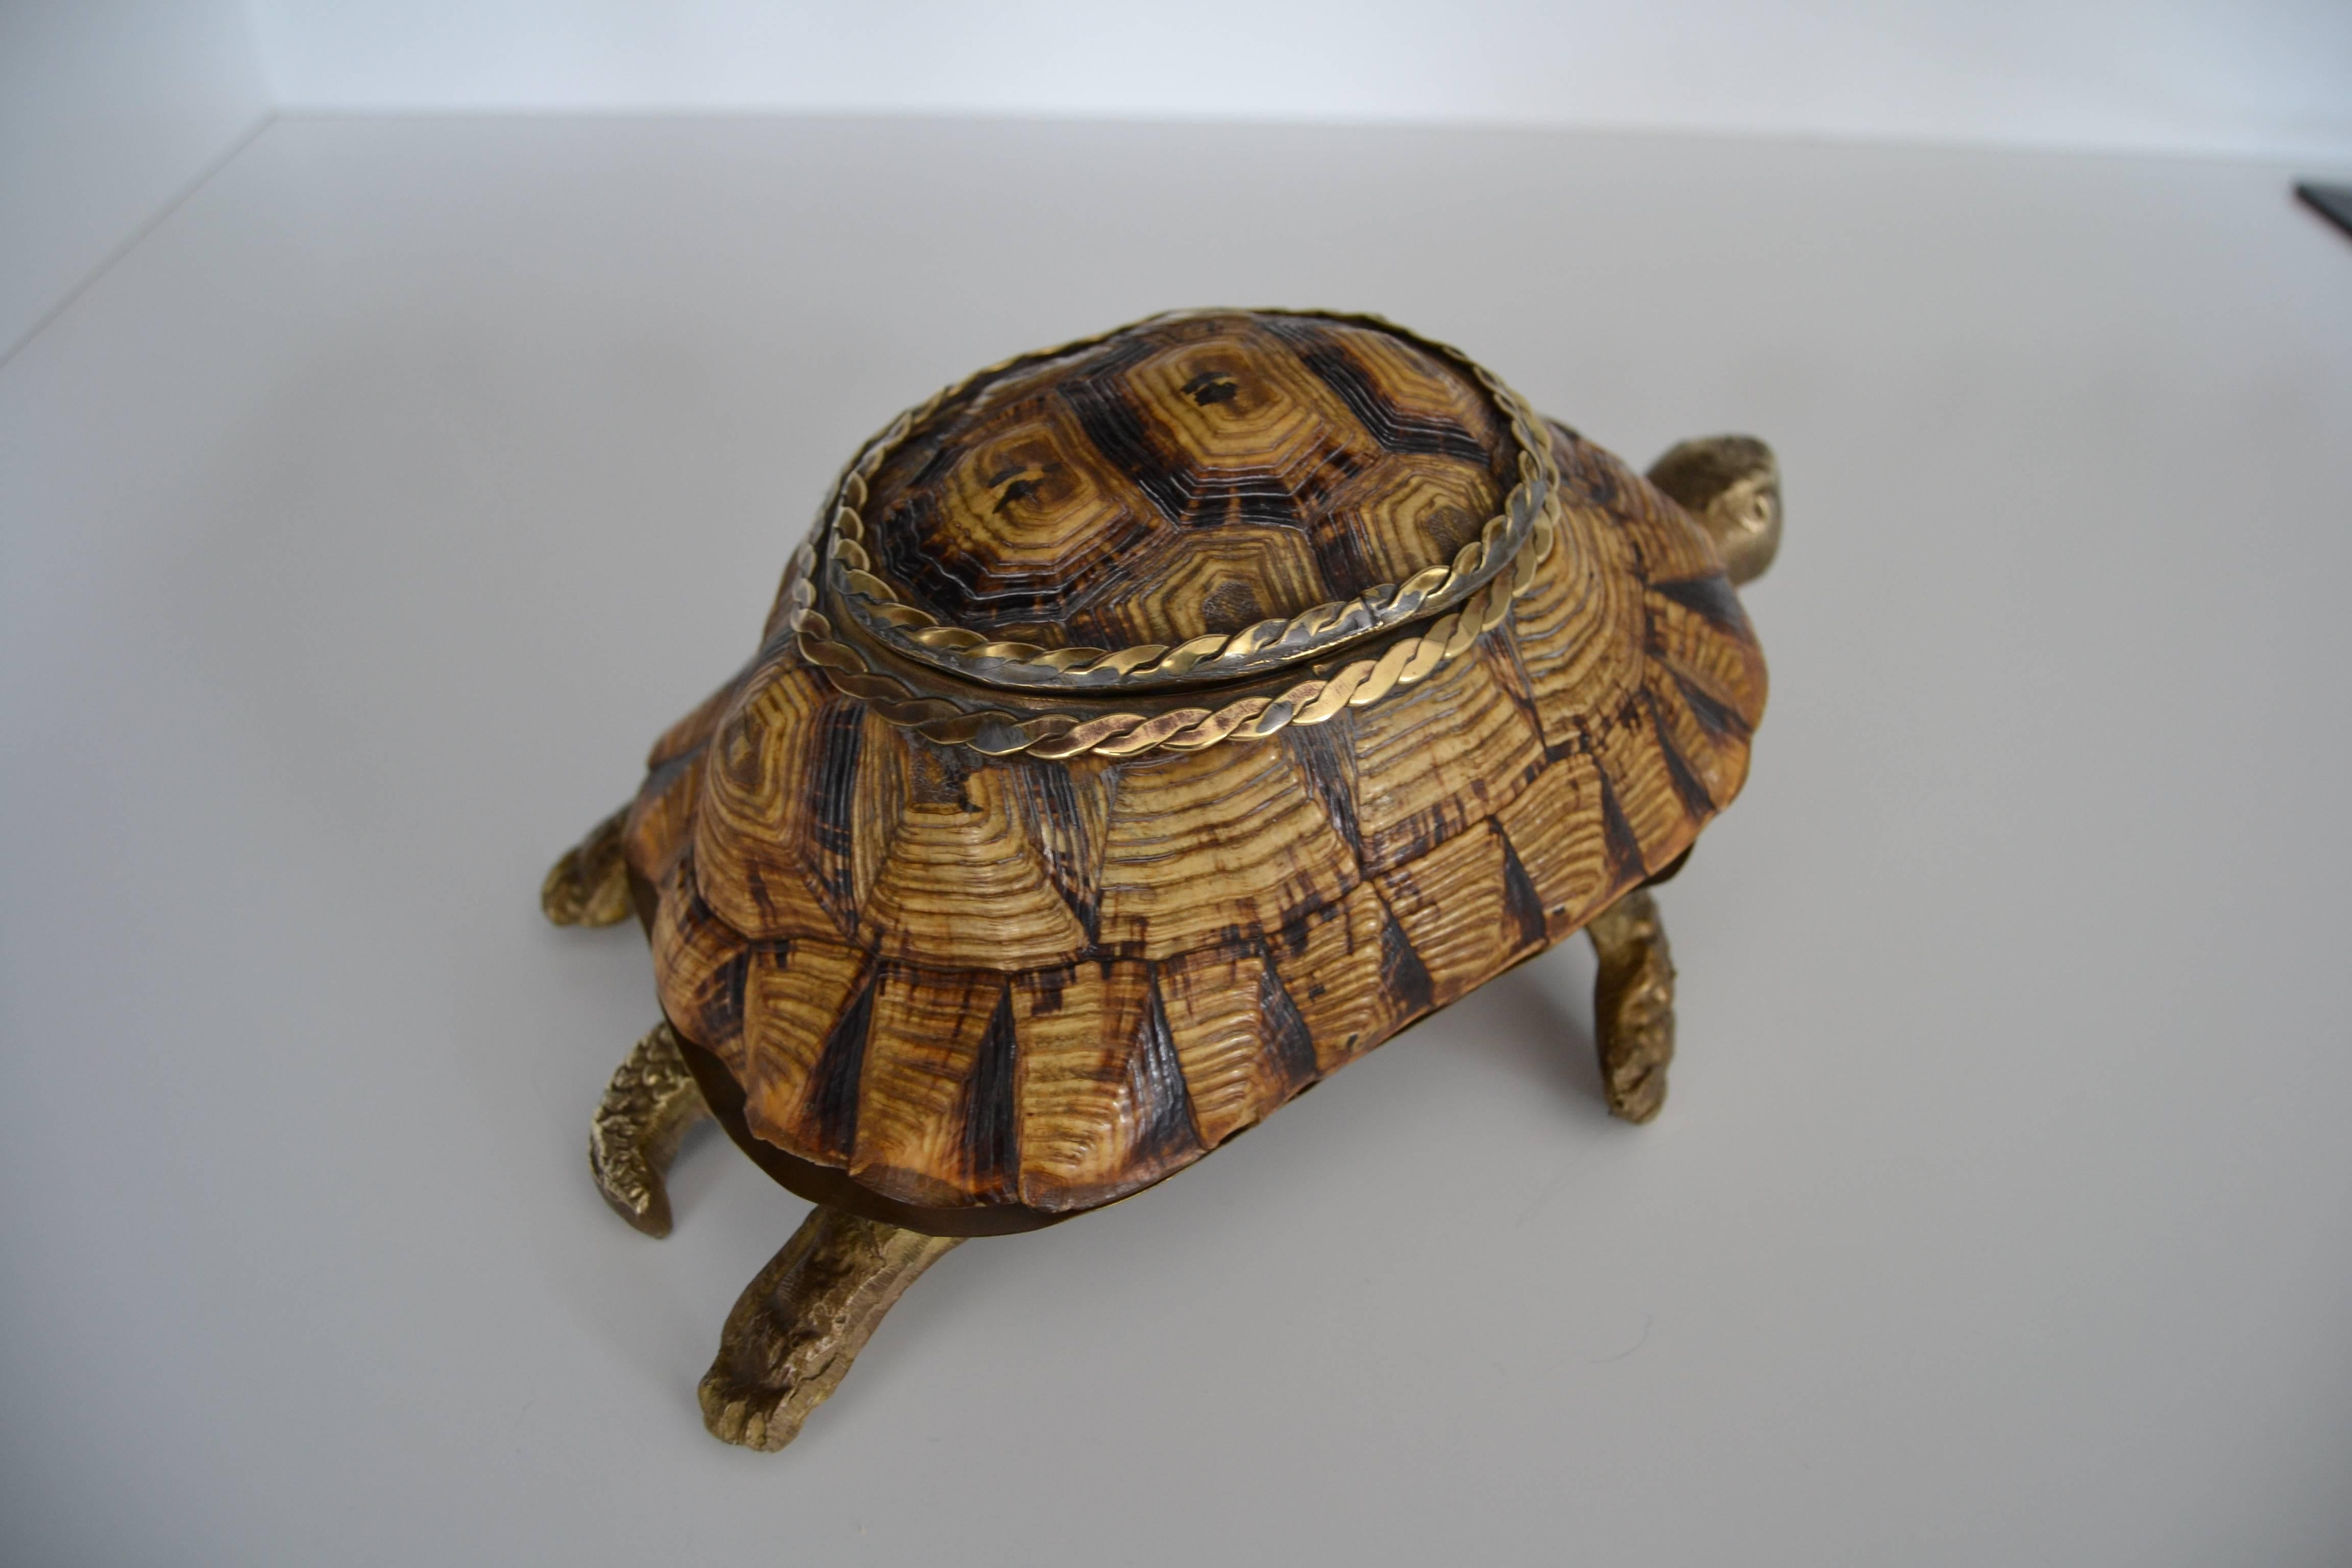 1970s turtle shell box with bronze and brass details.
Great vintage condition.